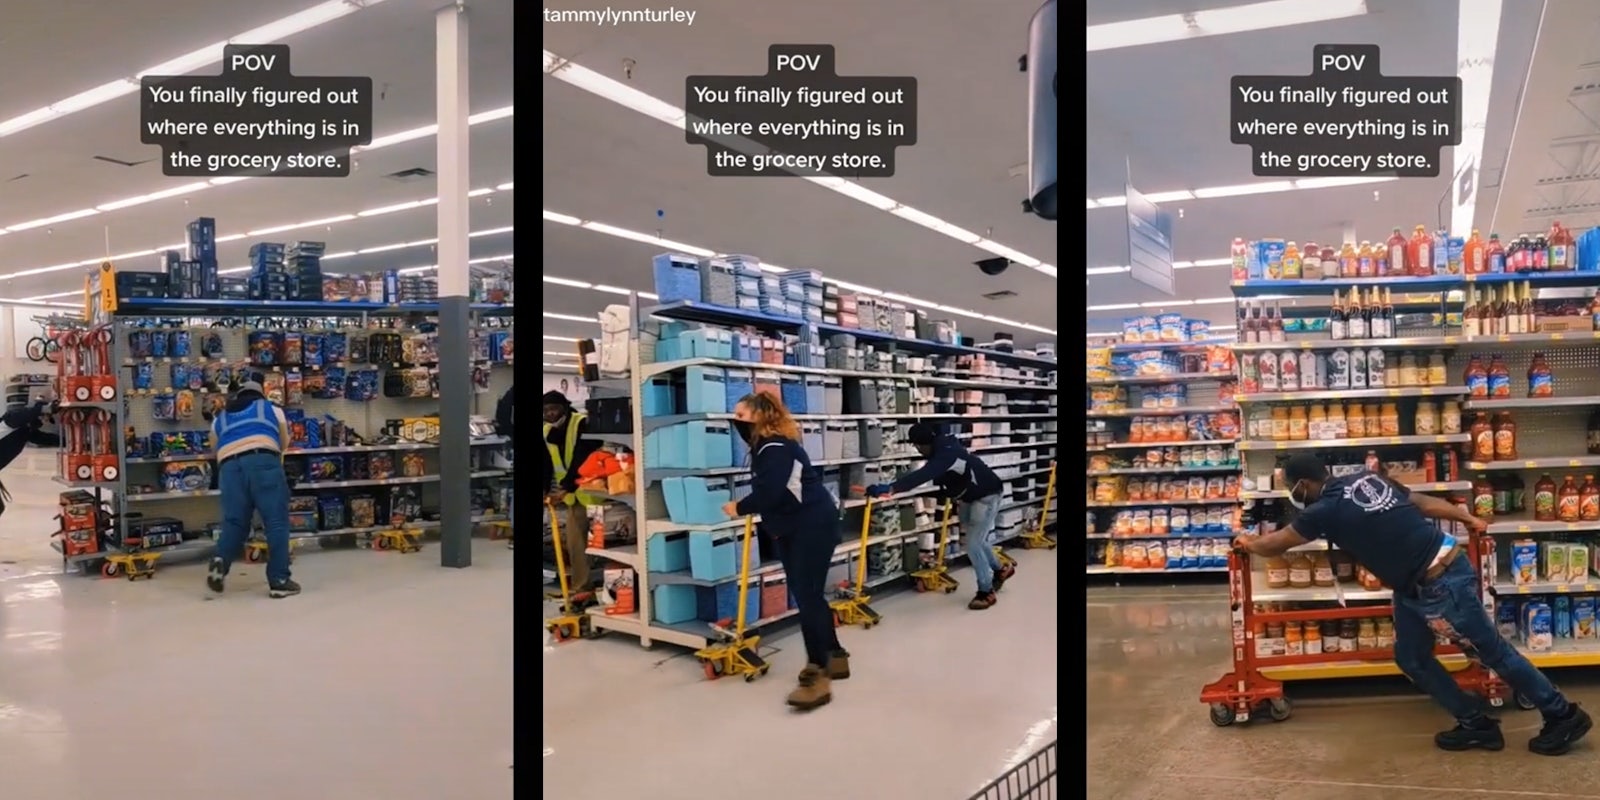 workers sliding stocked shelves into place with caption 'POV you finally figured out where everything is in the grocery store'